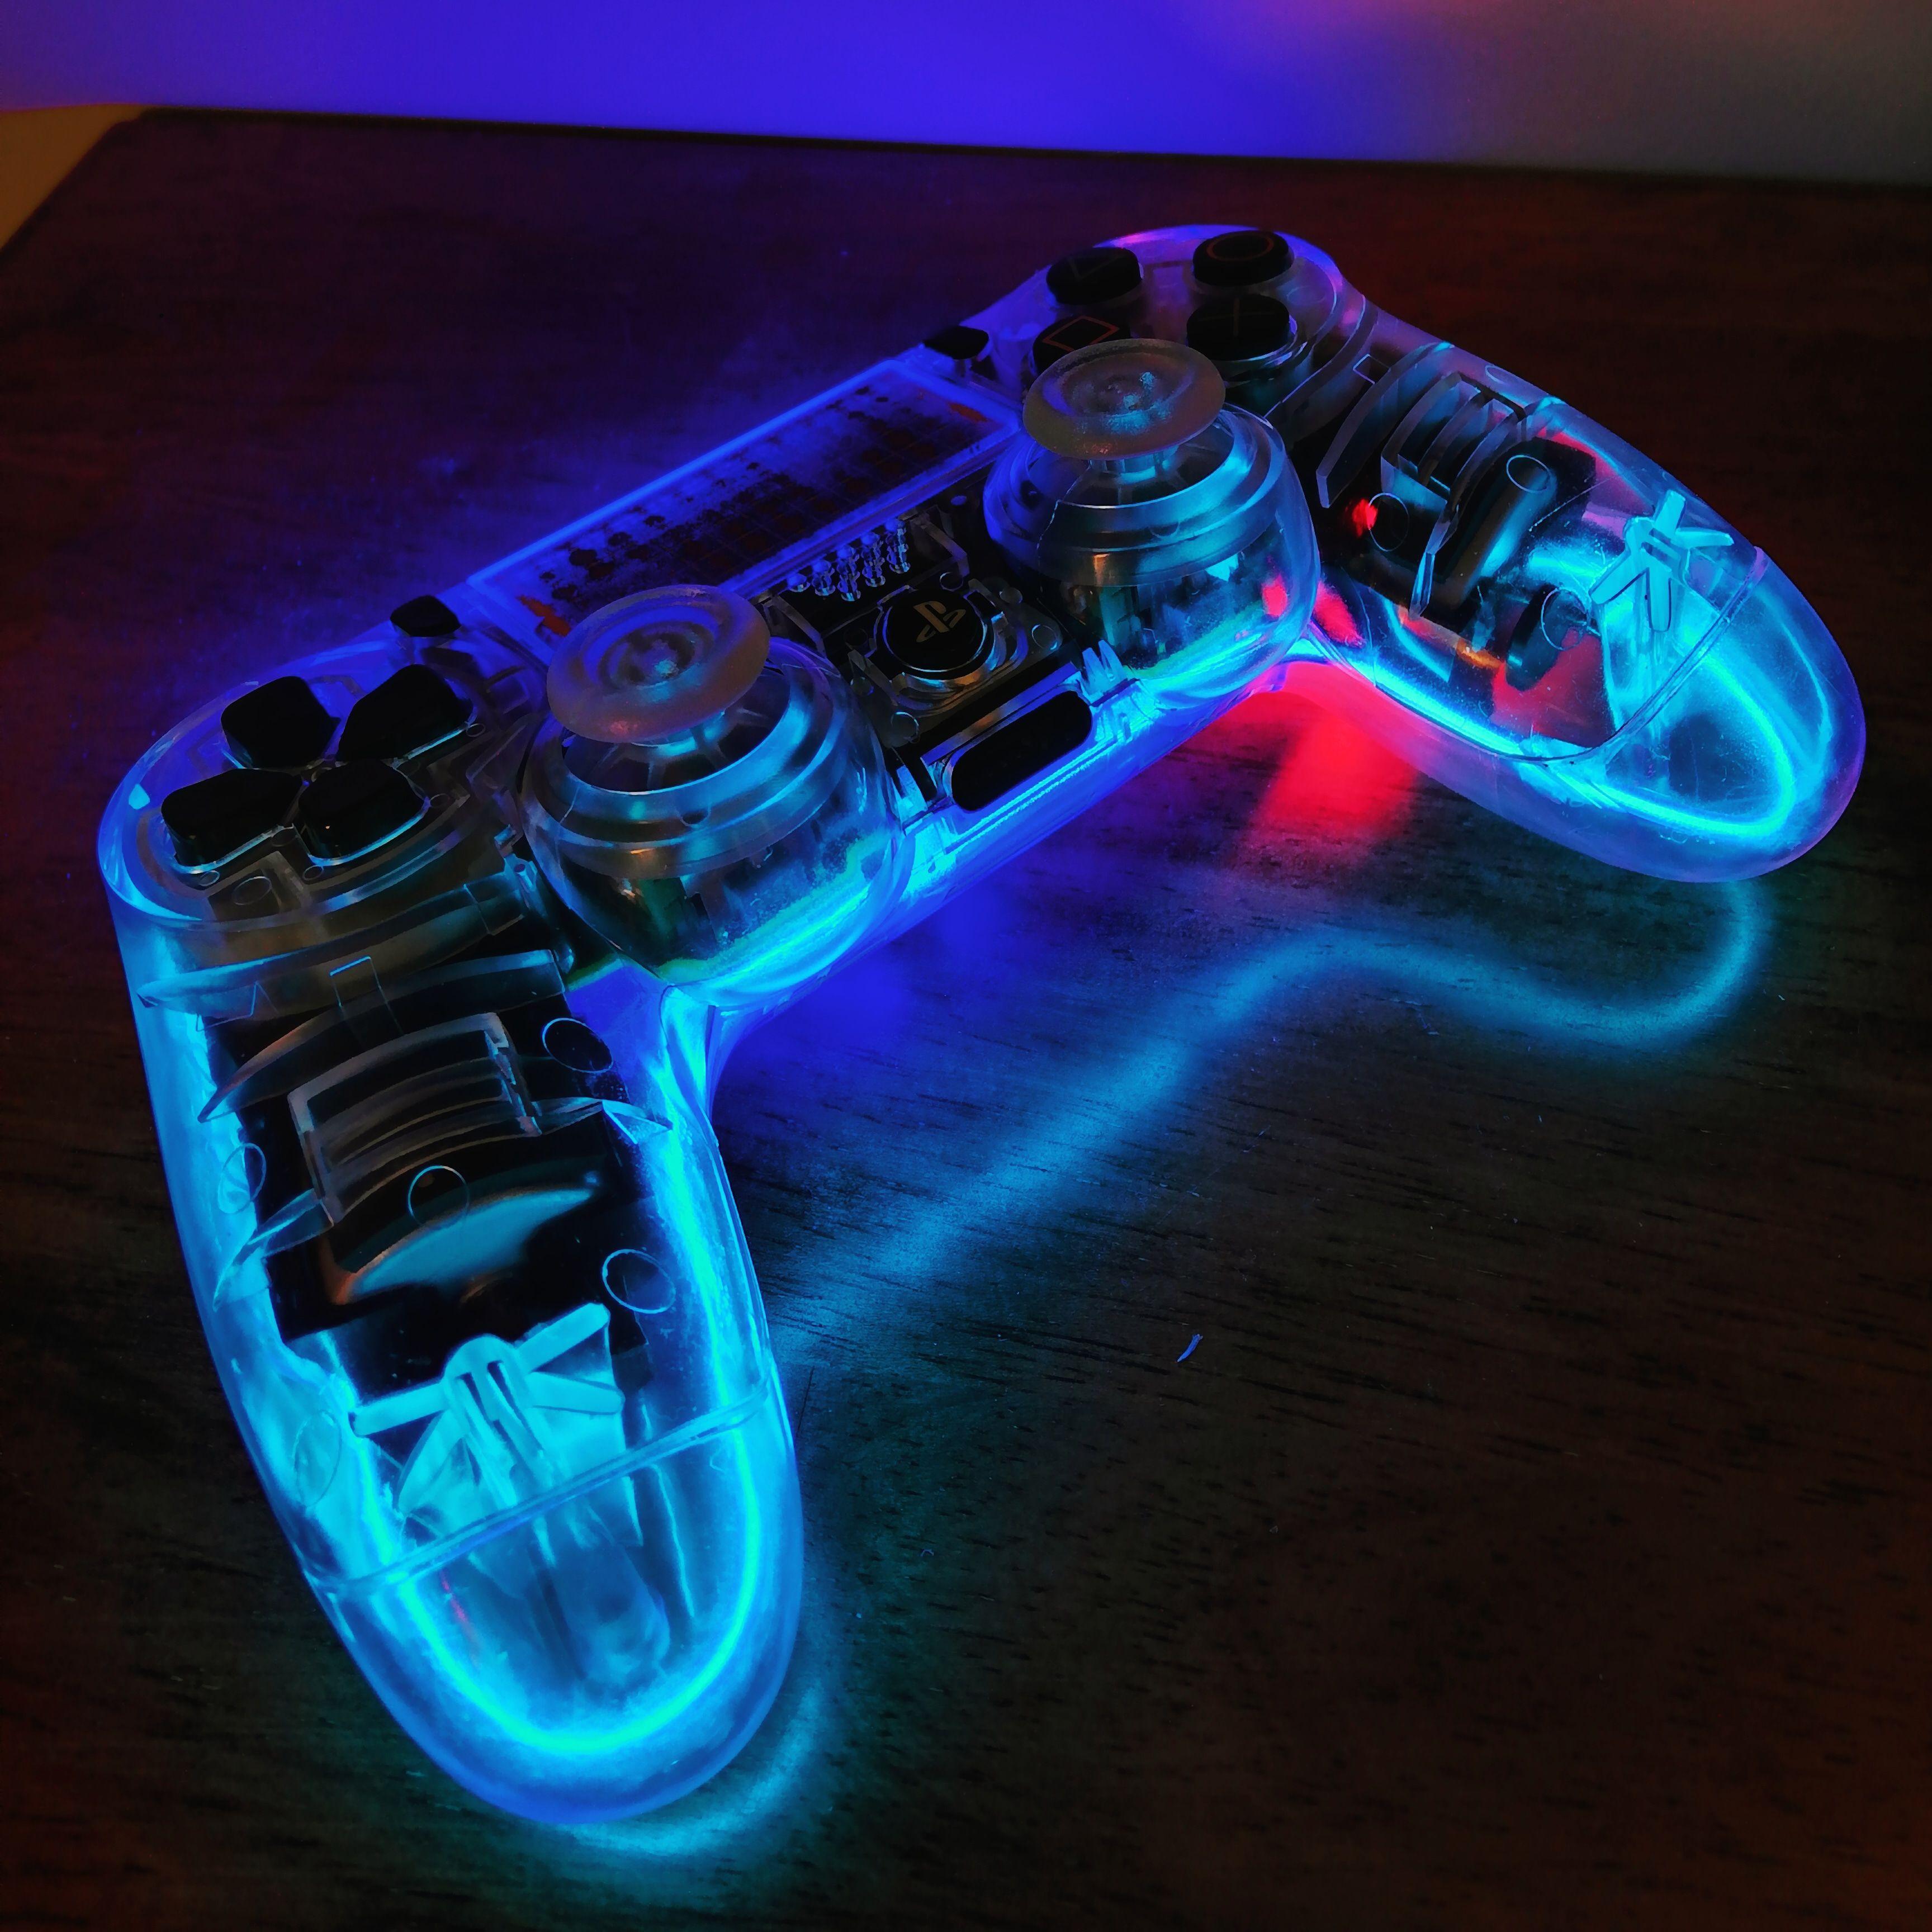 Game Controller Wallpaper 68 pictures